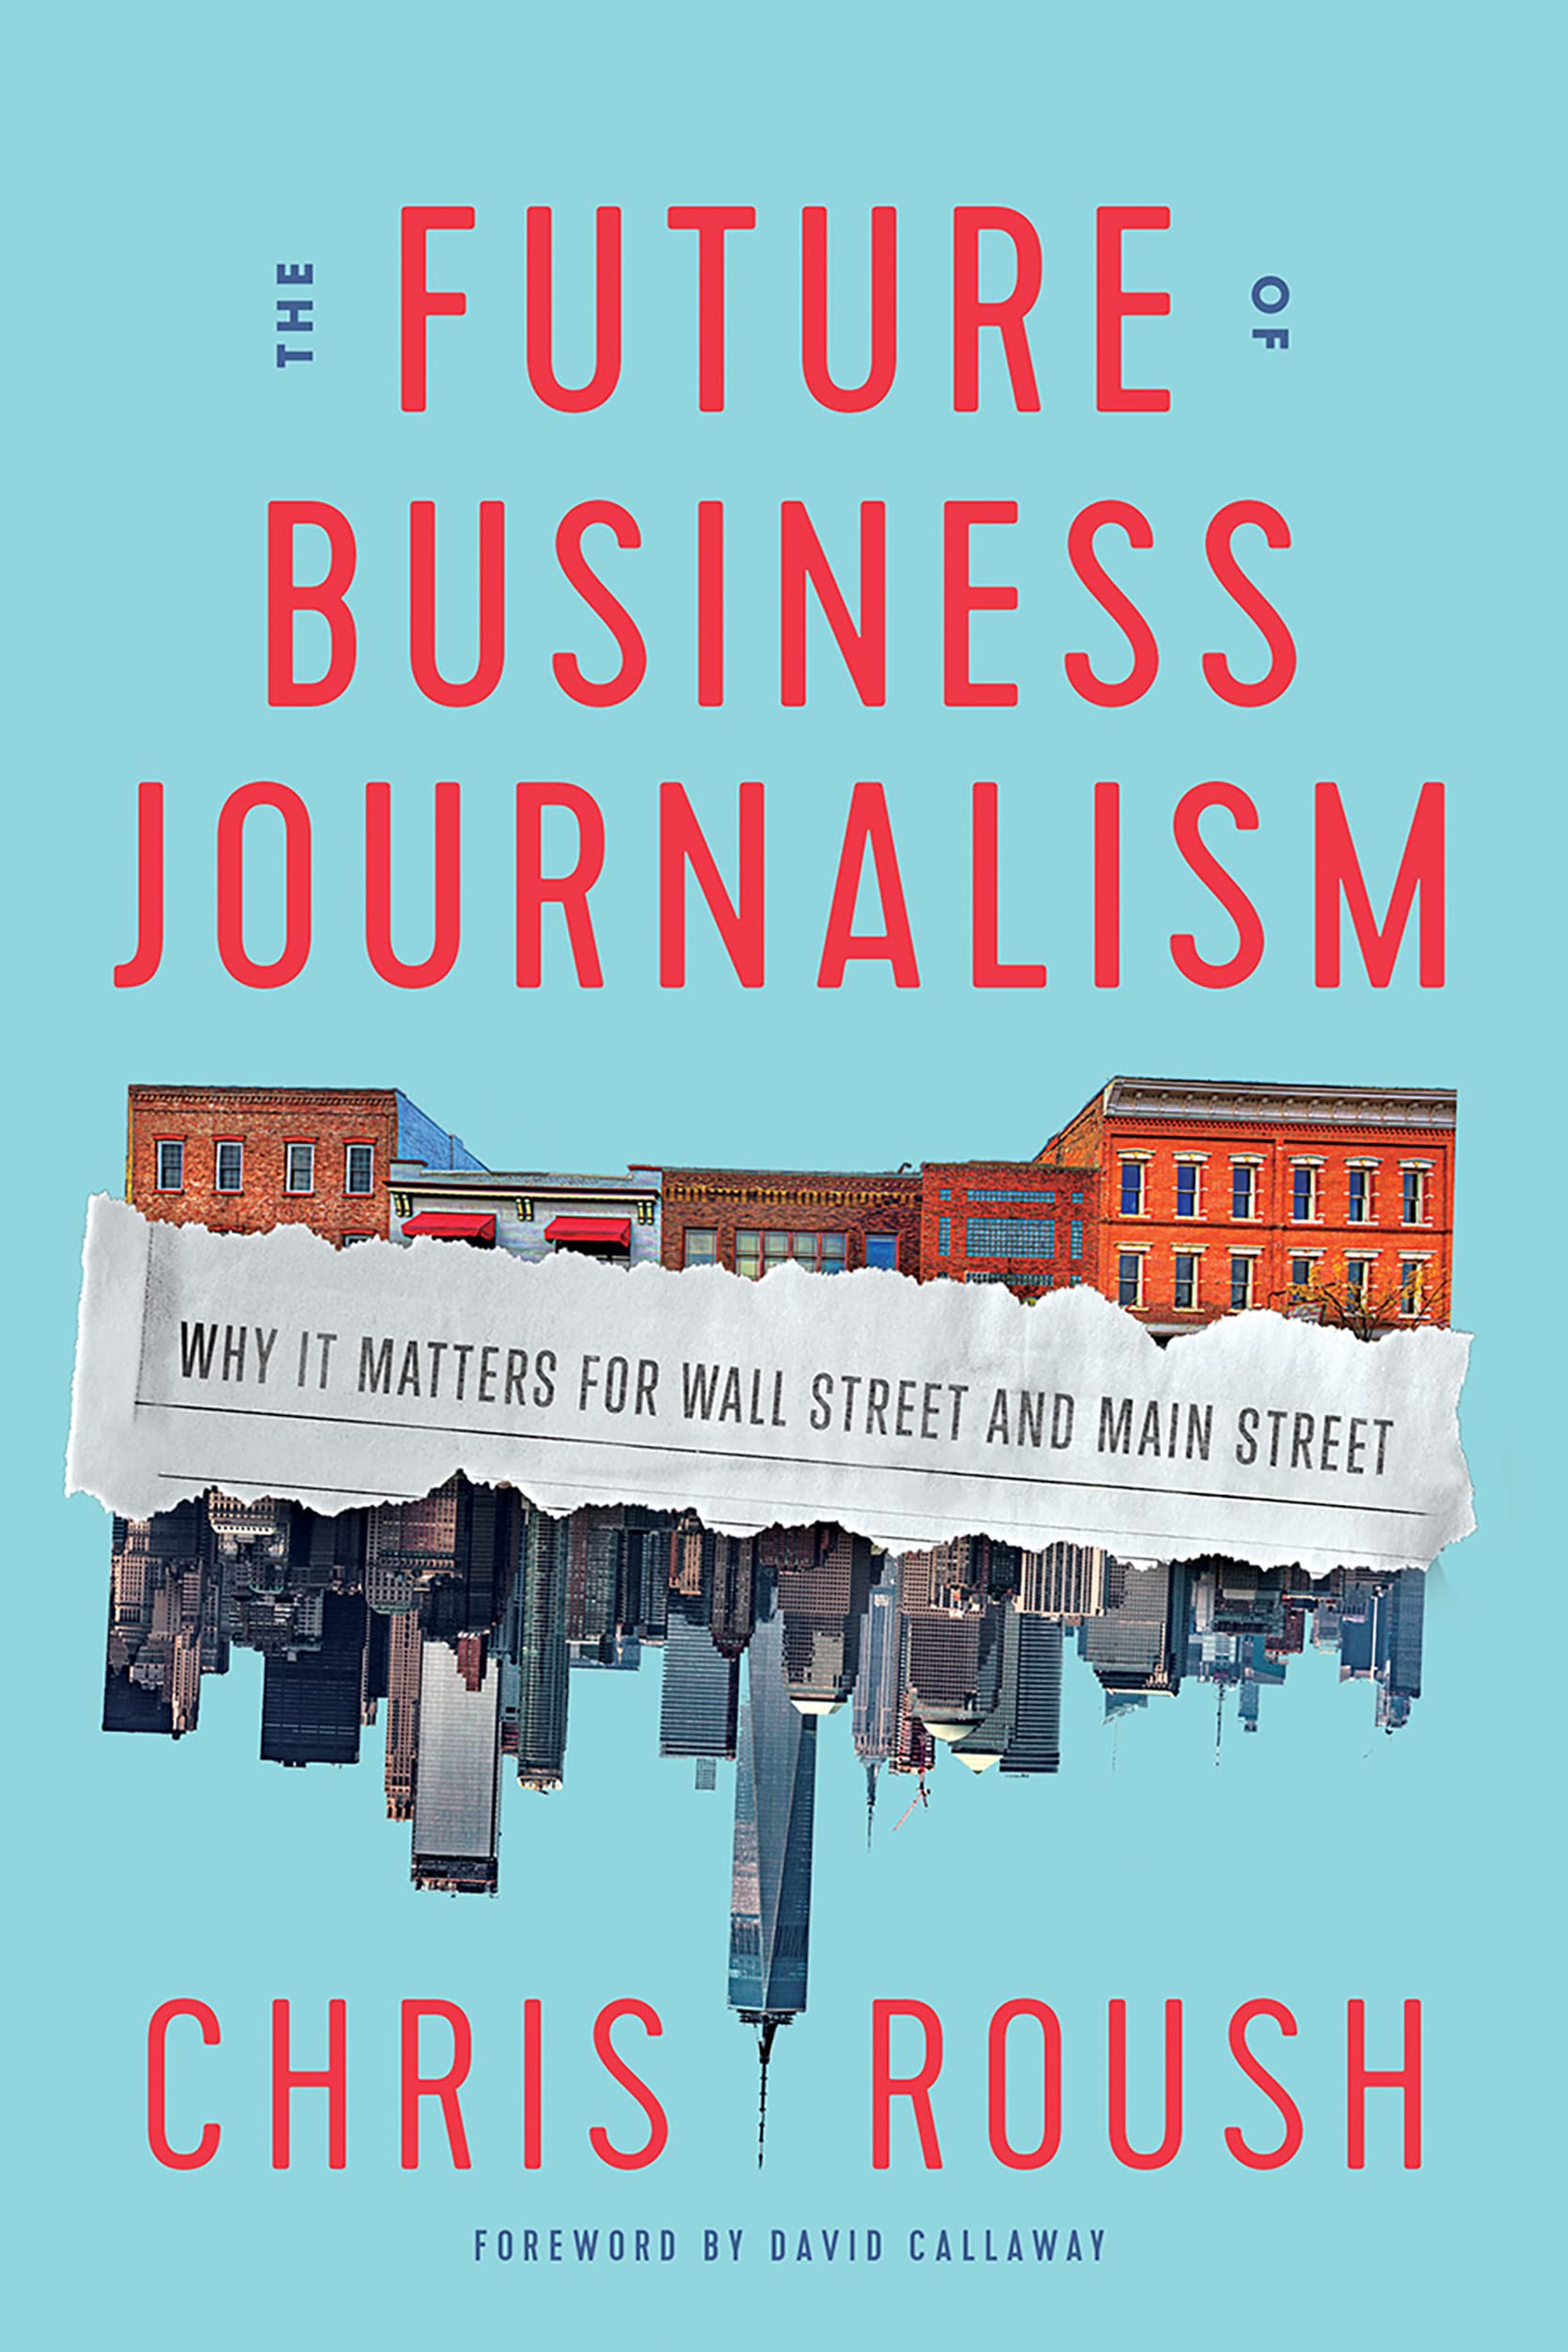 OPC book night discussion of "The Future of Business Journalism"